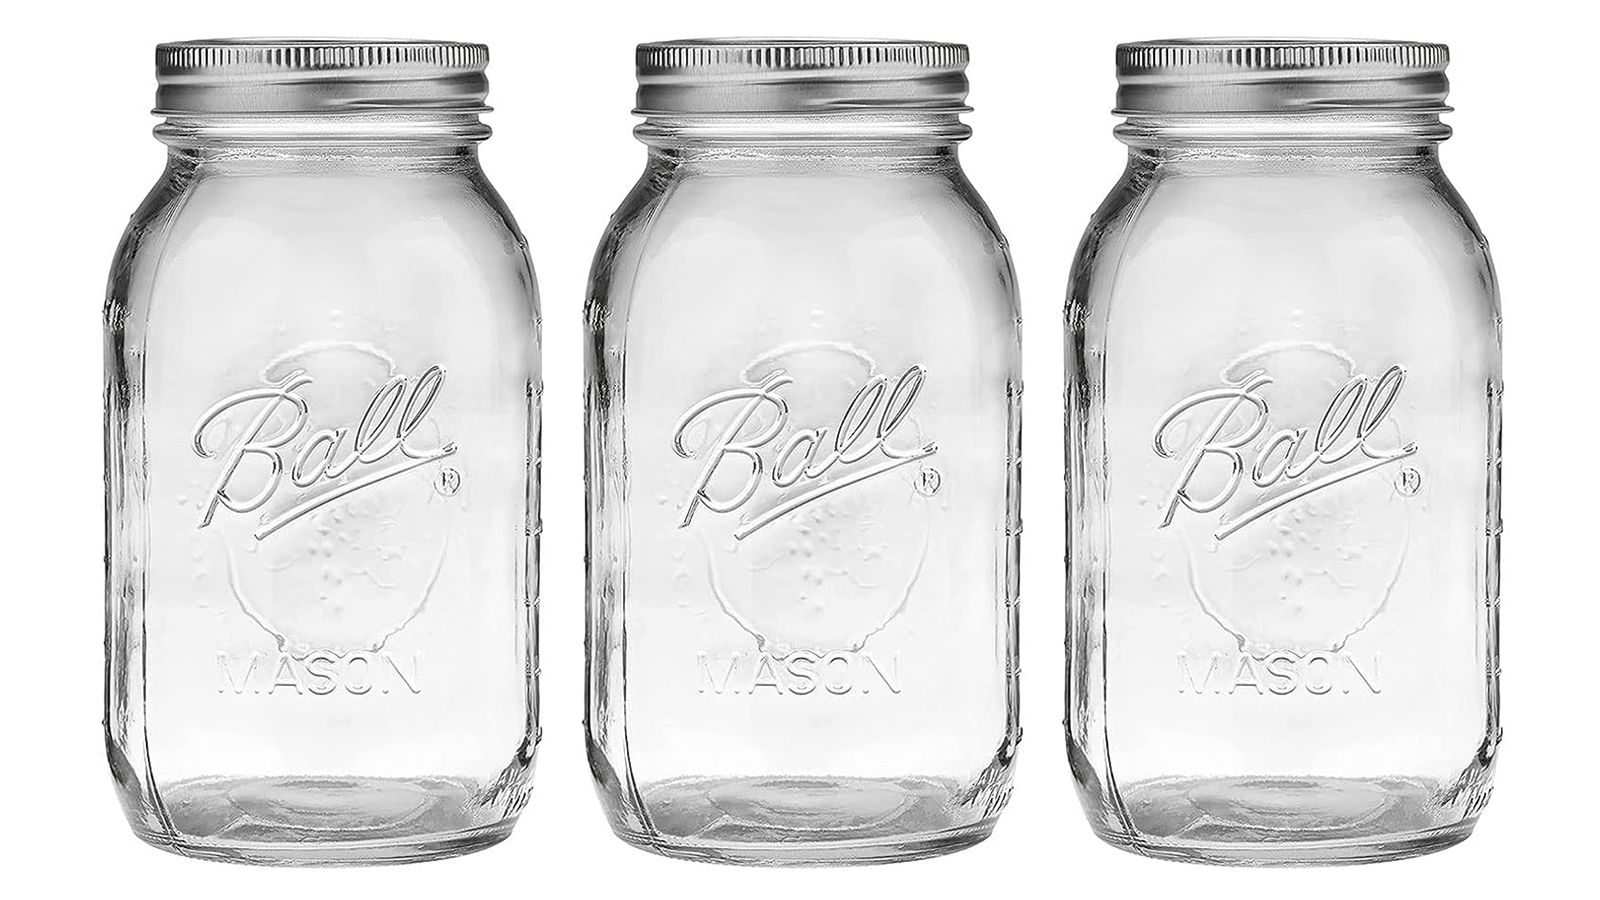 Smith's 6 x Mason Jar Mugs. Air tight lovely drinking glasses with